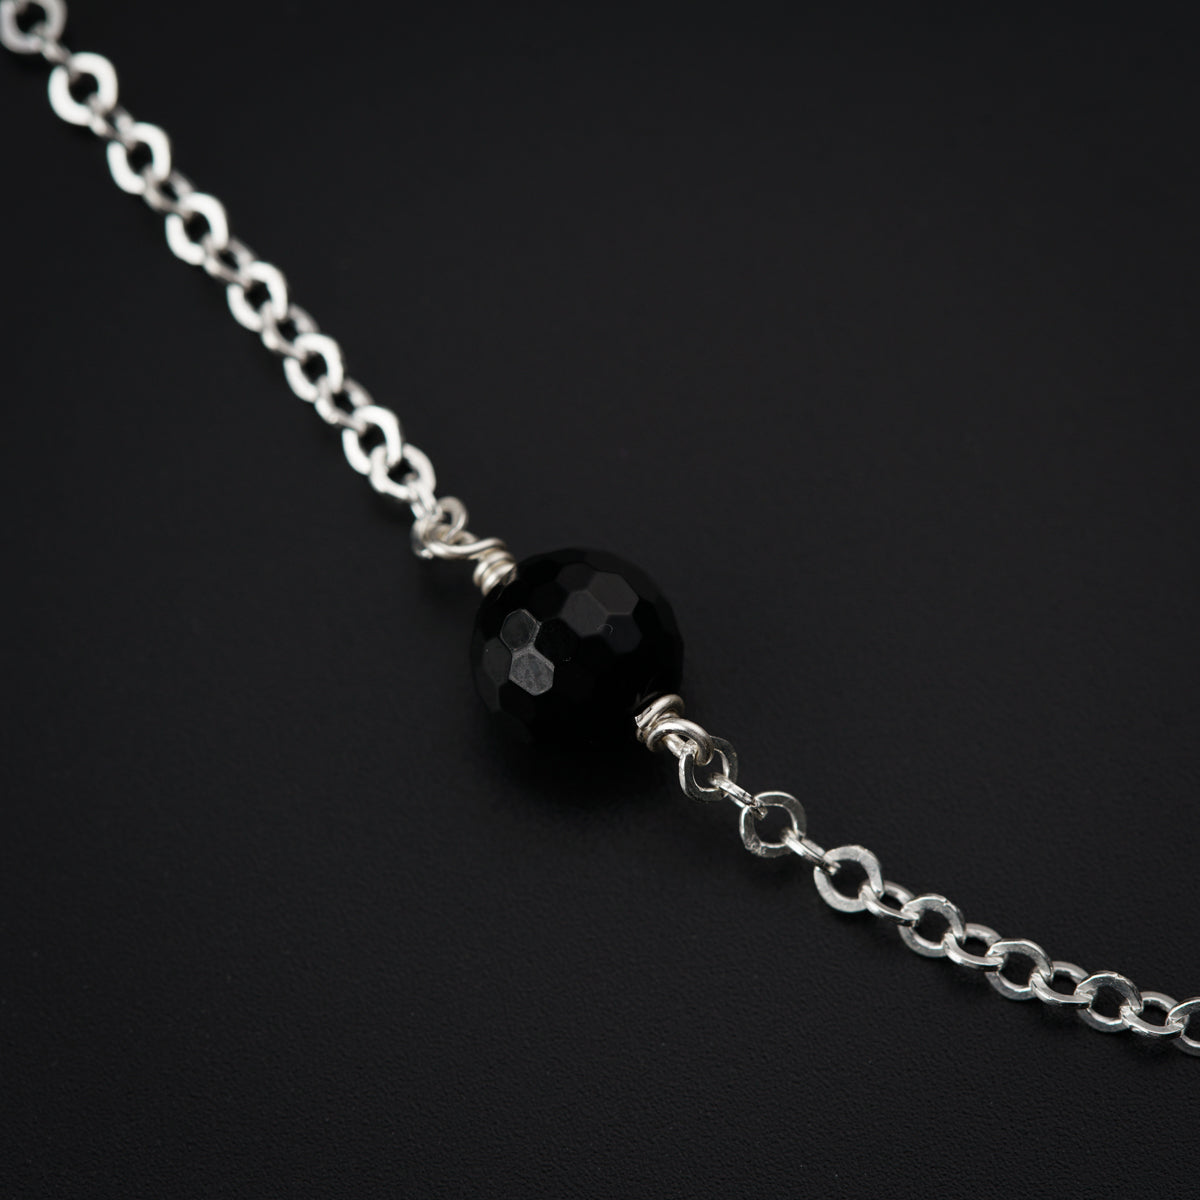 Black Spinel Chain: Long